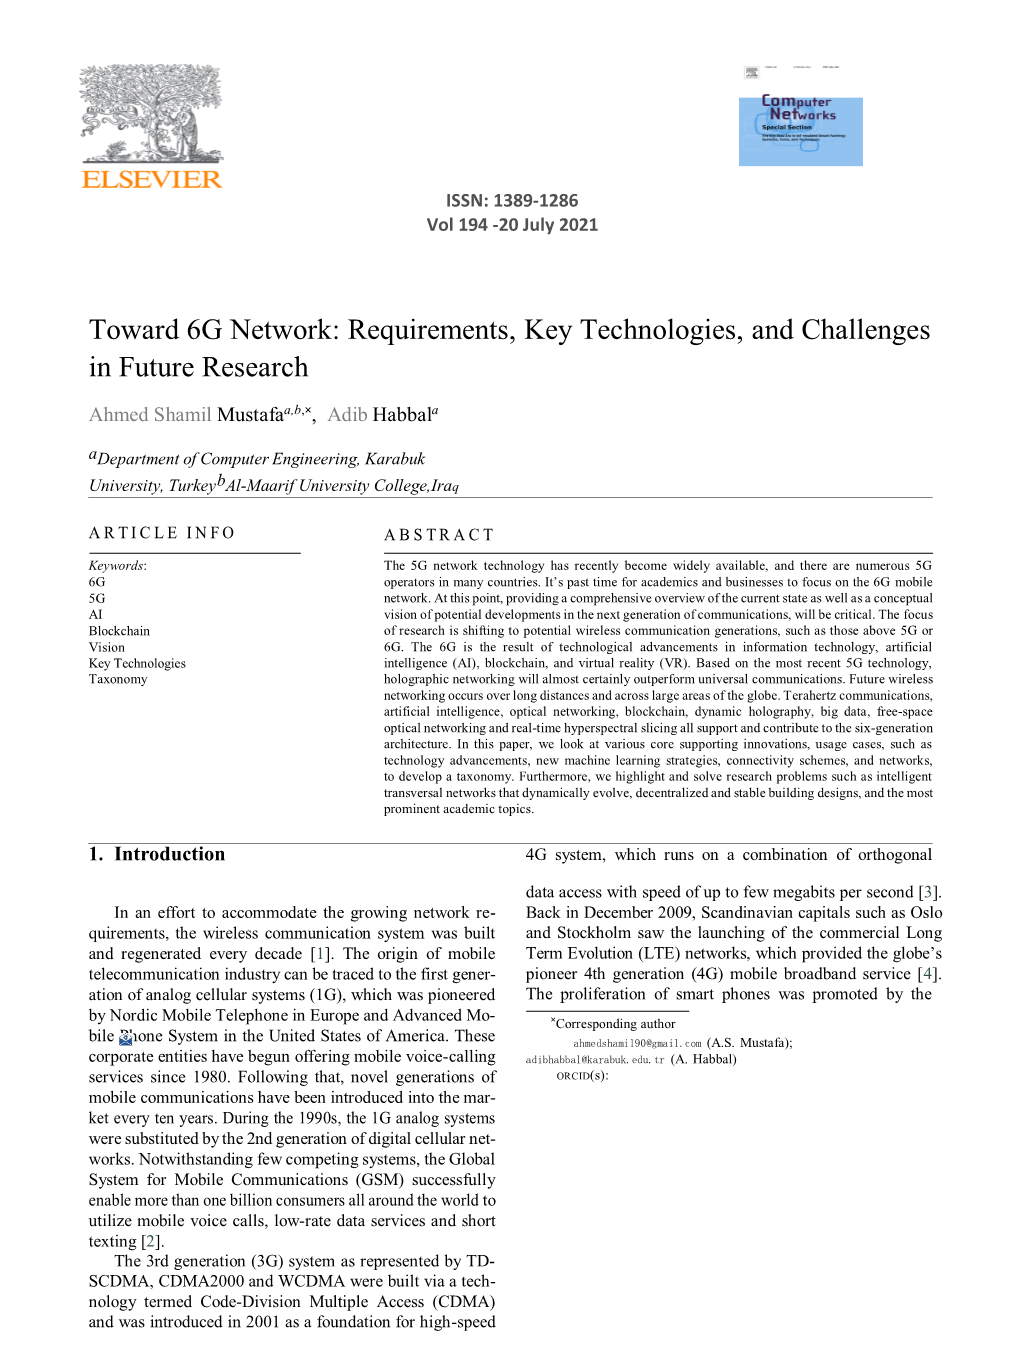 Toward 6G Network: Requirements, Key Technologies, and Challenges in Future Research